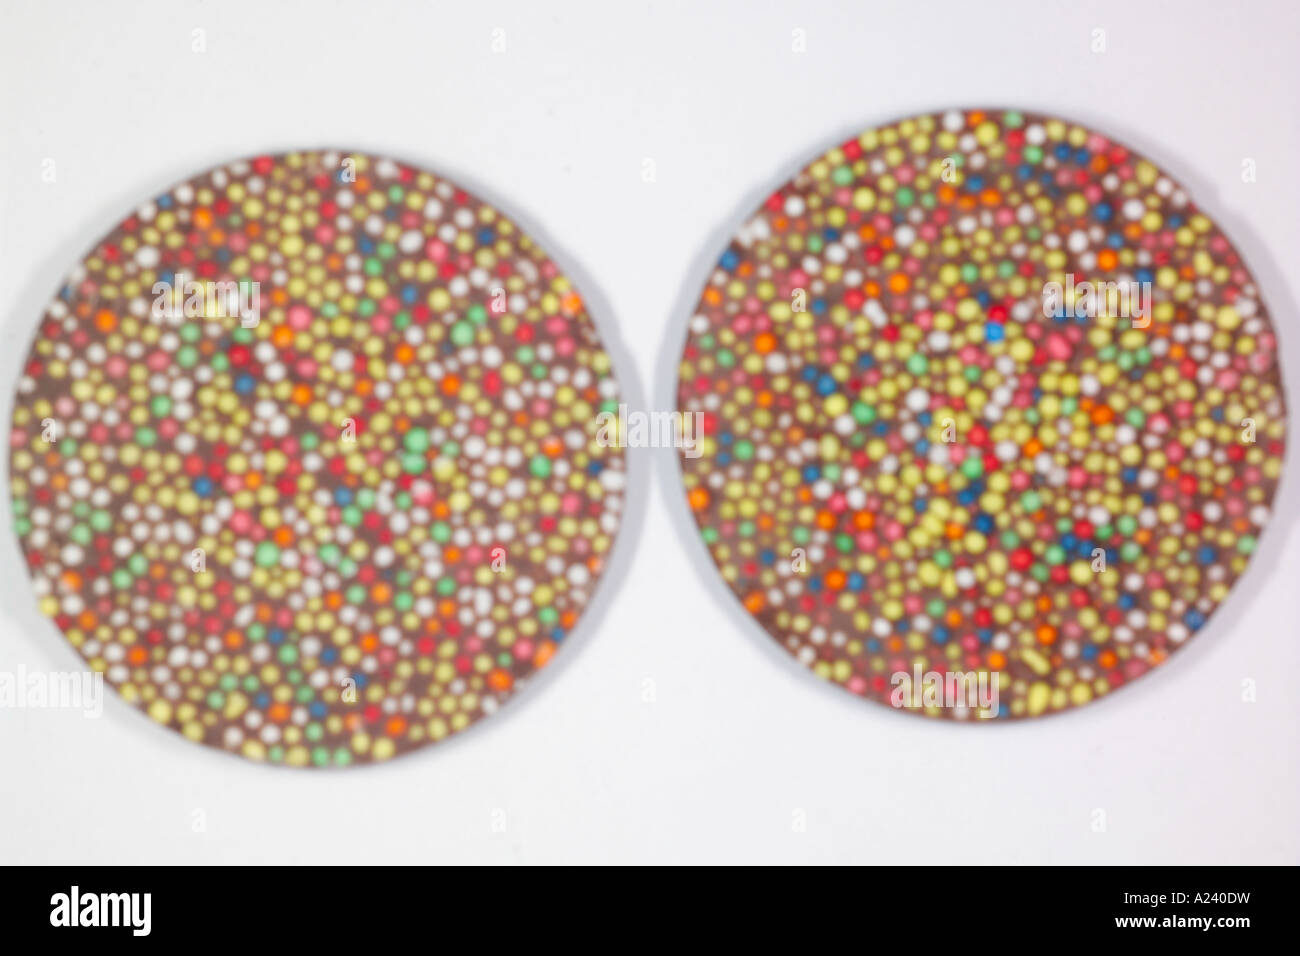 Large milk chocolate discs covered in sprinkles. Stock Photo